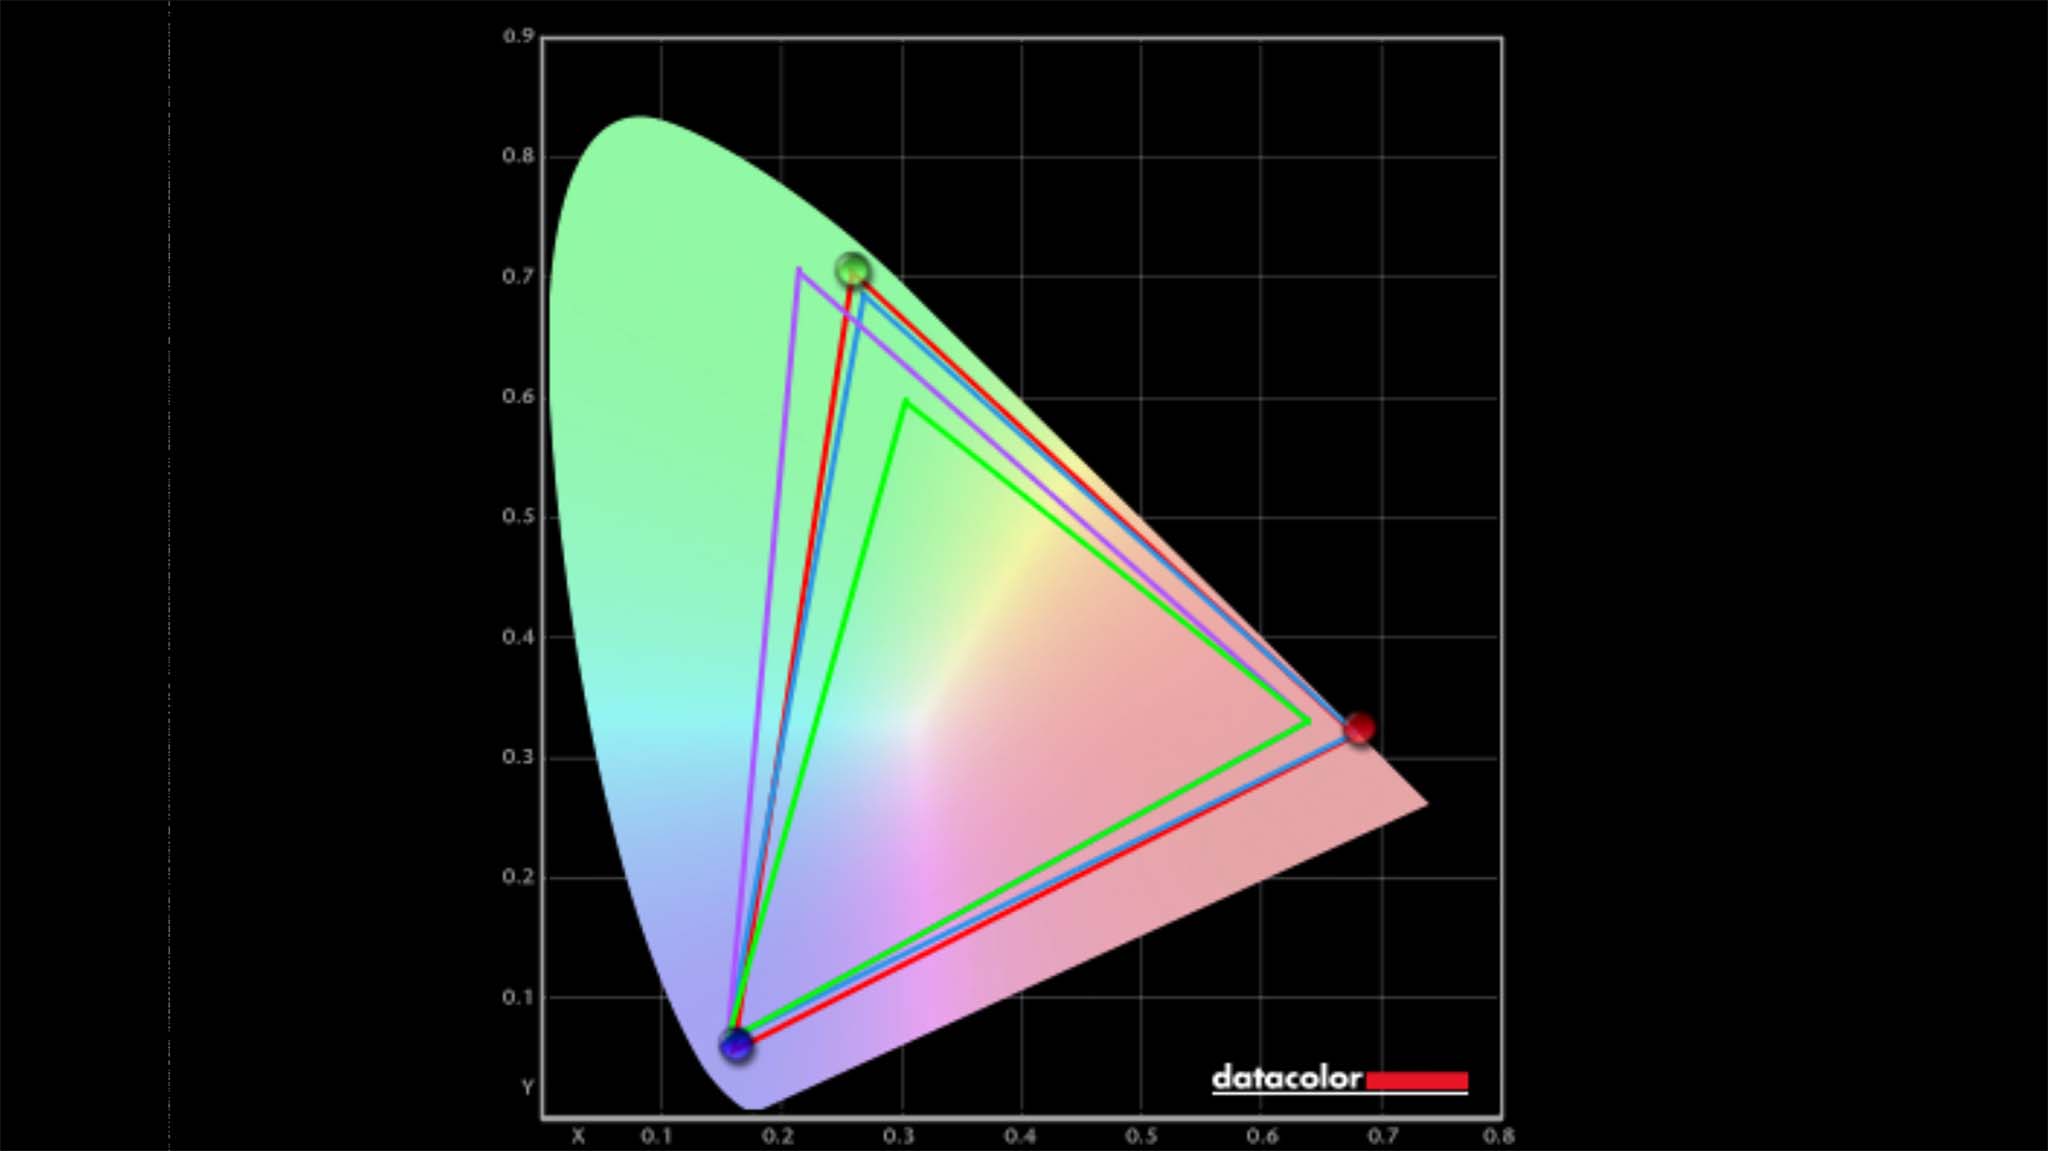 Dell XPS 16 (9640) color gamut results.